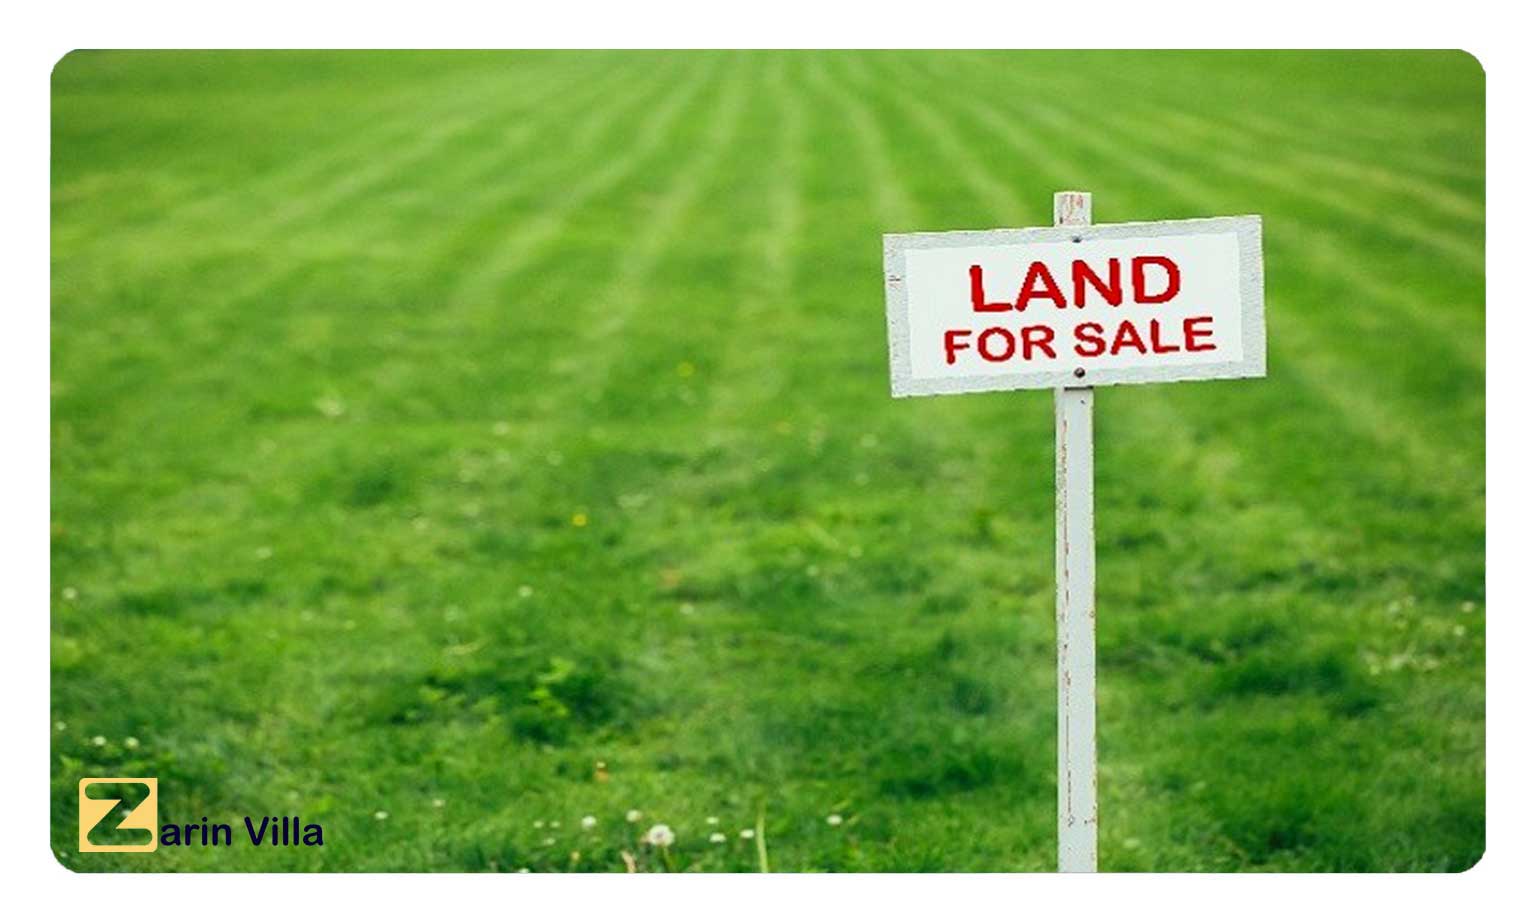 Buying land in the north